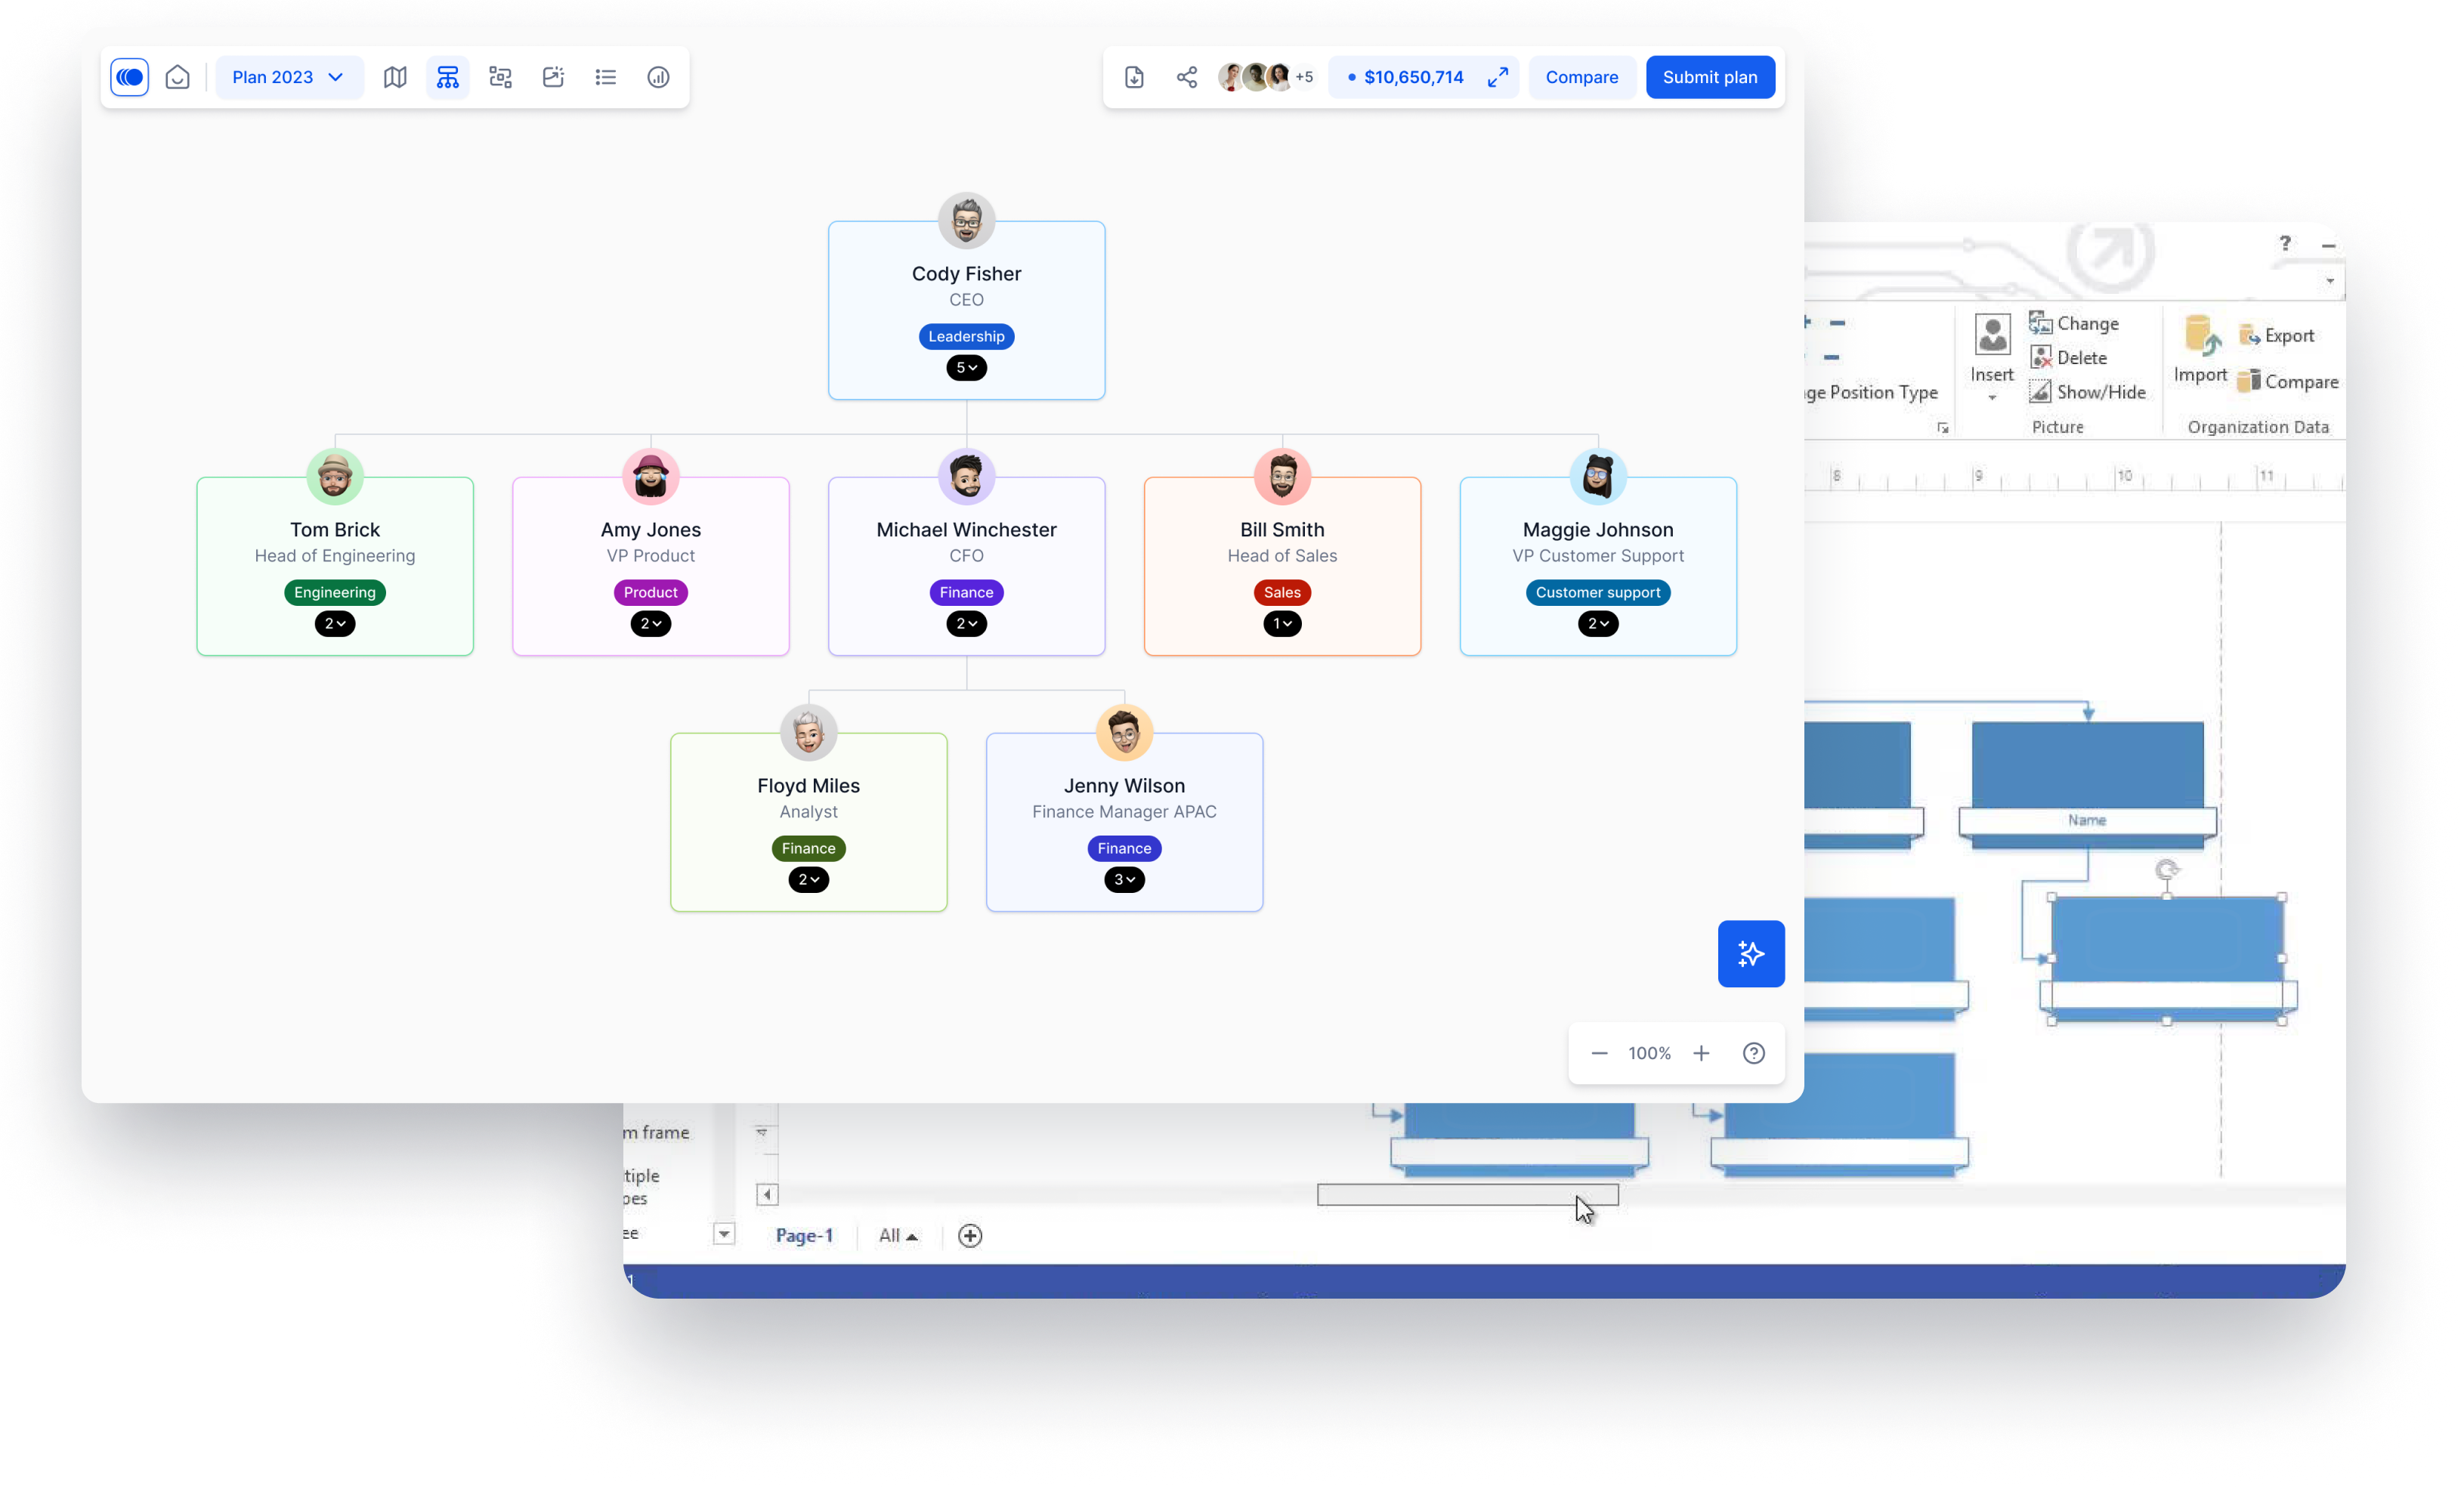 Agentnoon is an MS Visio alternative for org visualization